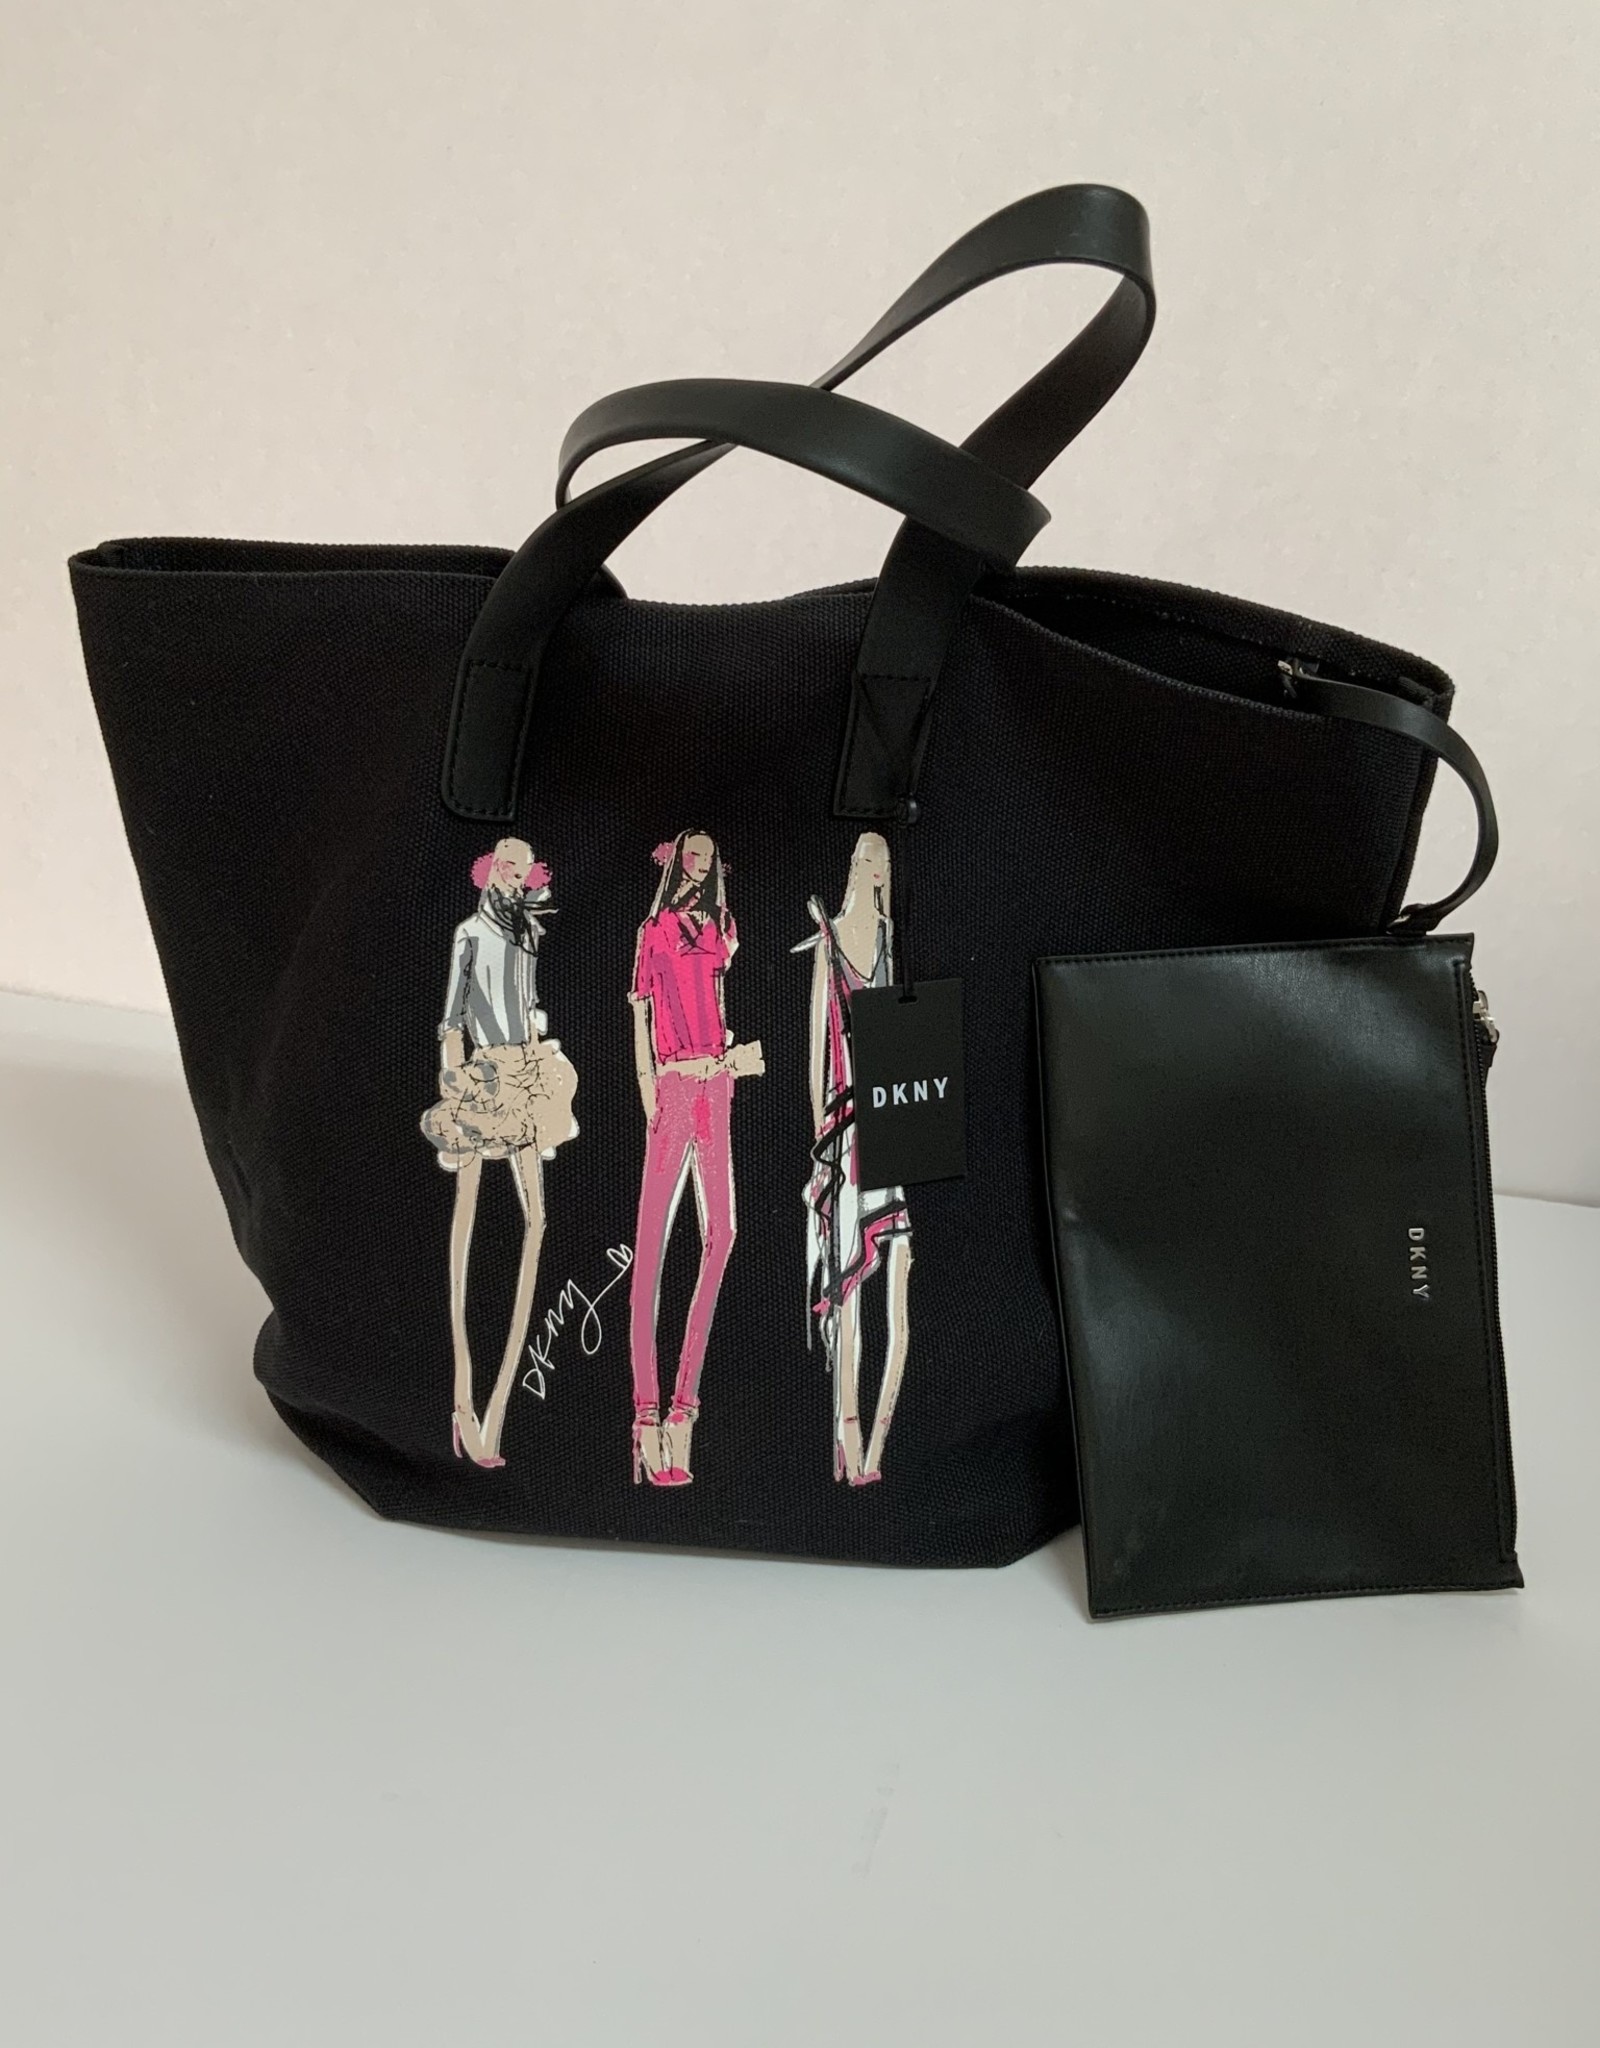 DKNY DKNY Tote Corrie Sketch Girl w/ Leather Pouch